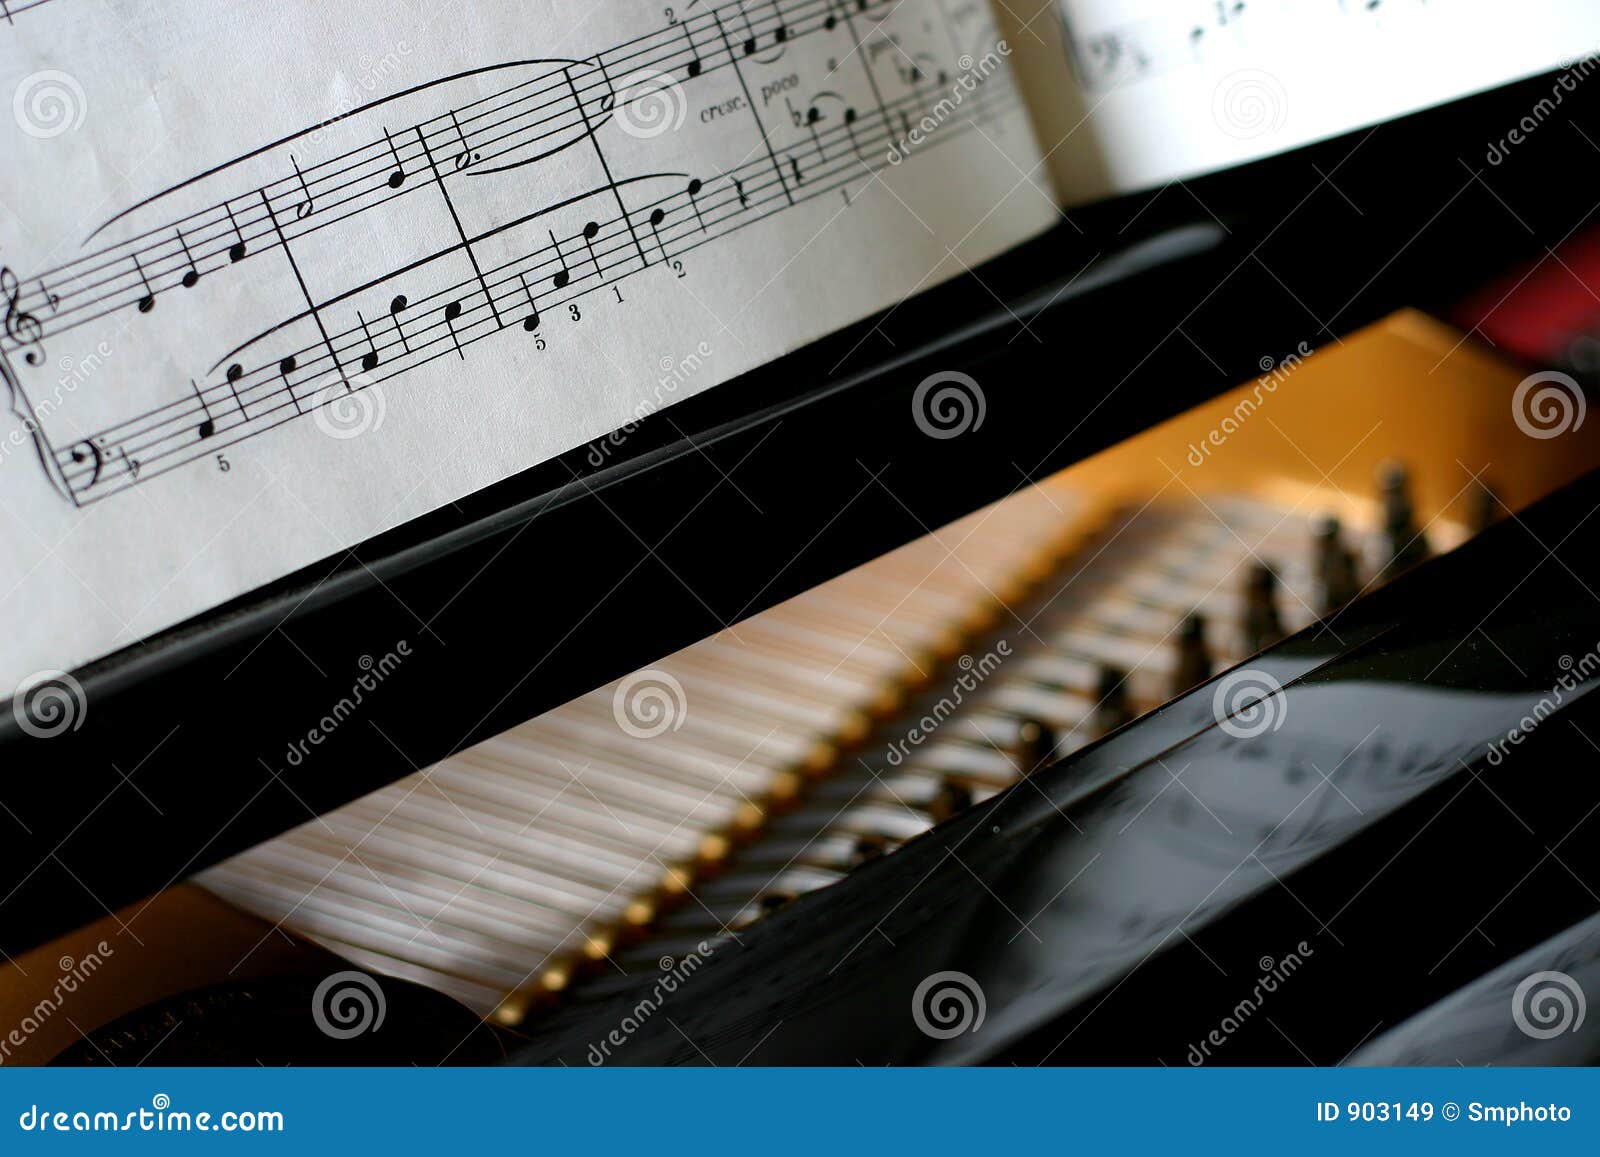 Baby grand piano detail stock image. Image of instrument ...